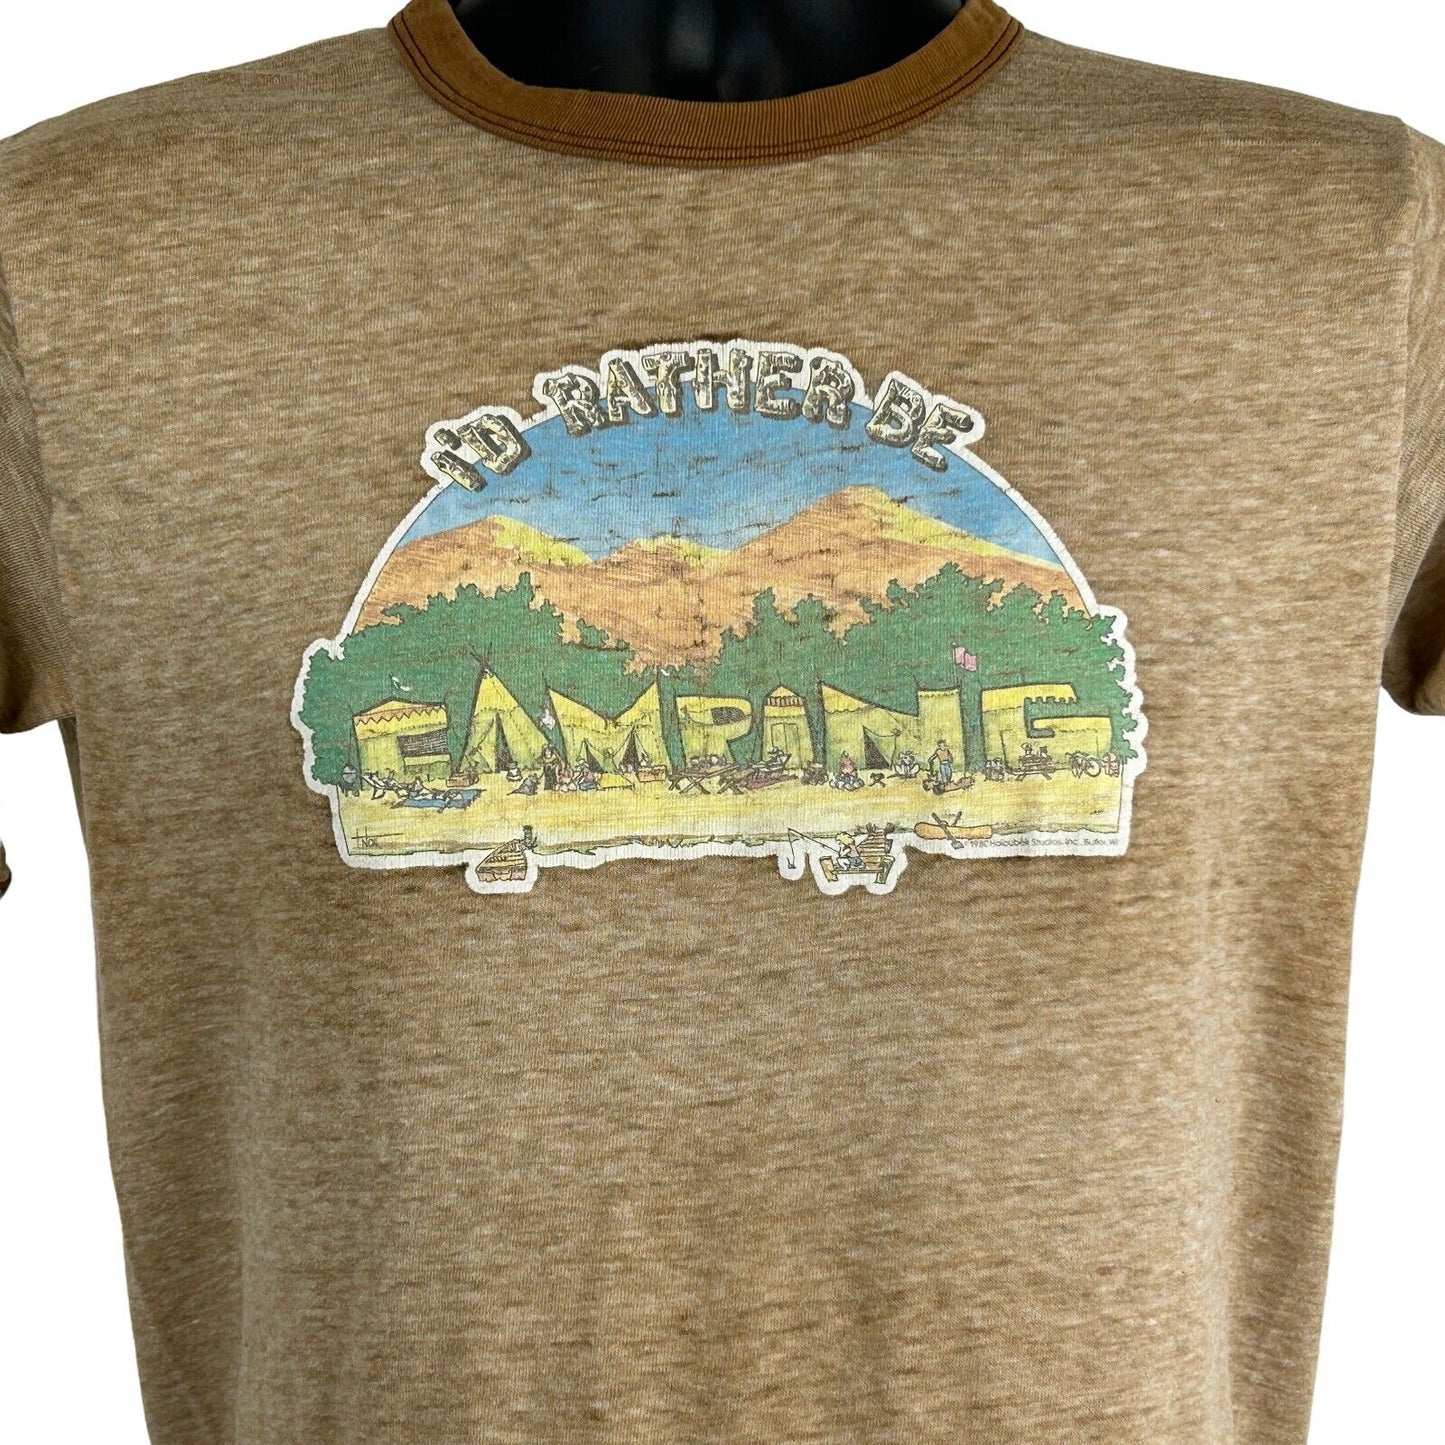 I'd Rather Be Camping Vintage 80s Ringer T Shirt Outdoors Camper USA Made Small